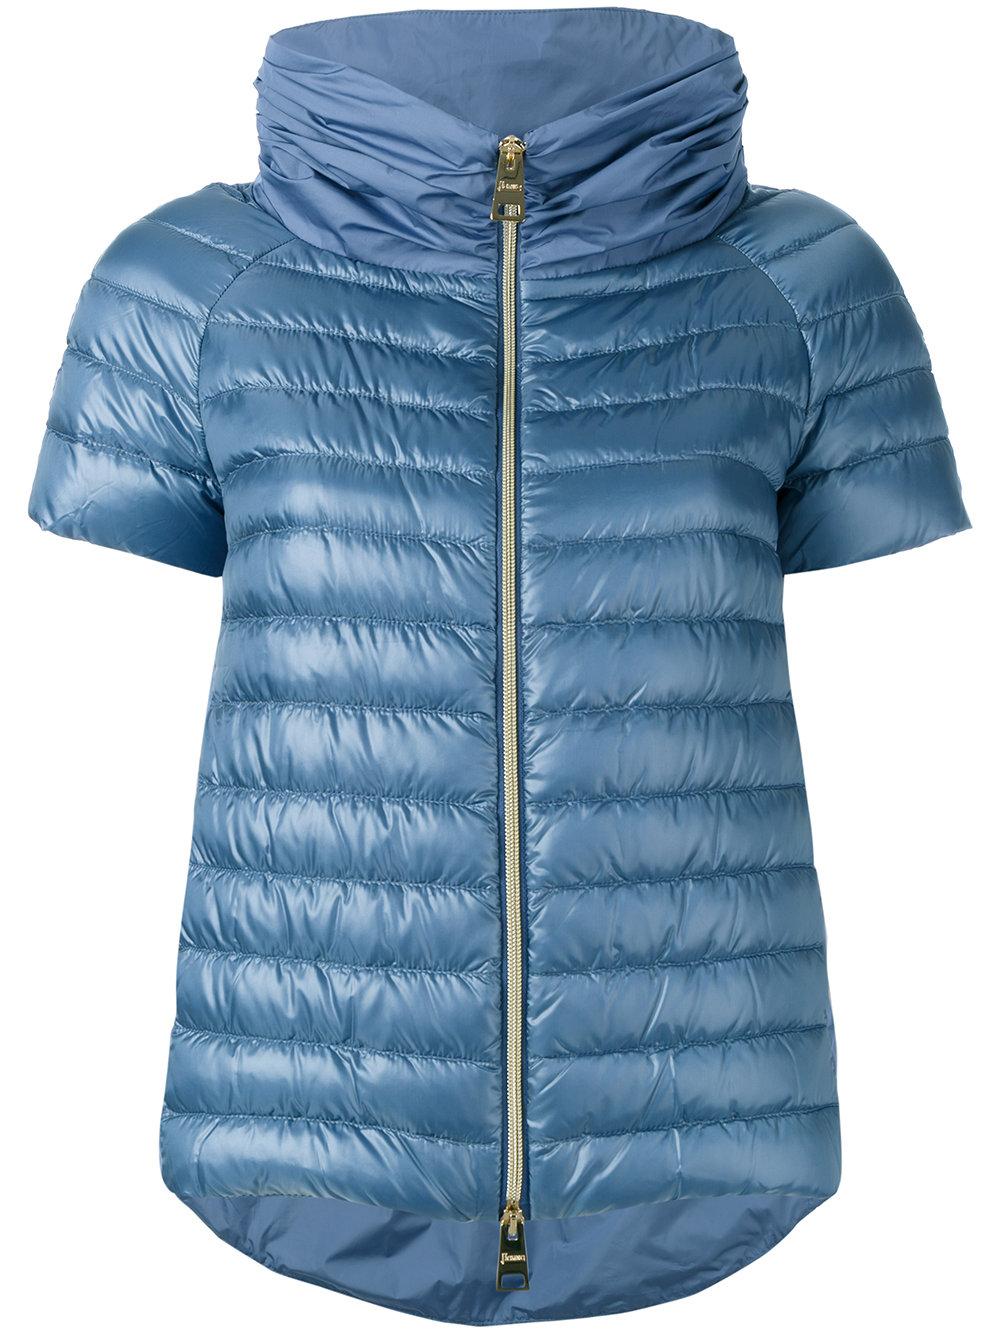 Lyst - Herno Short-sleeved Puffer Jacket in Blue